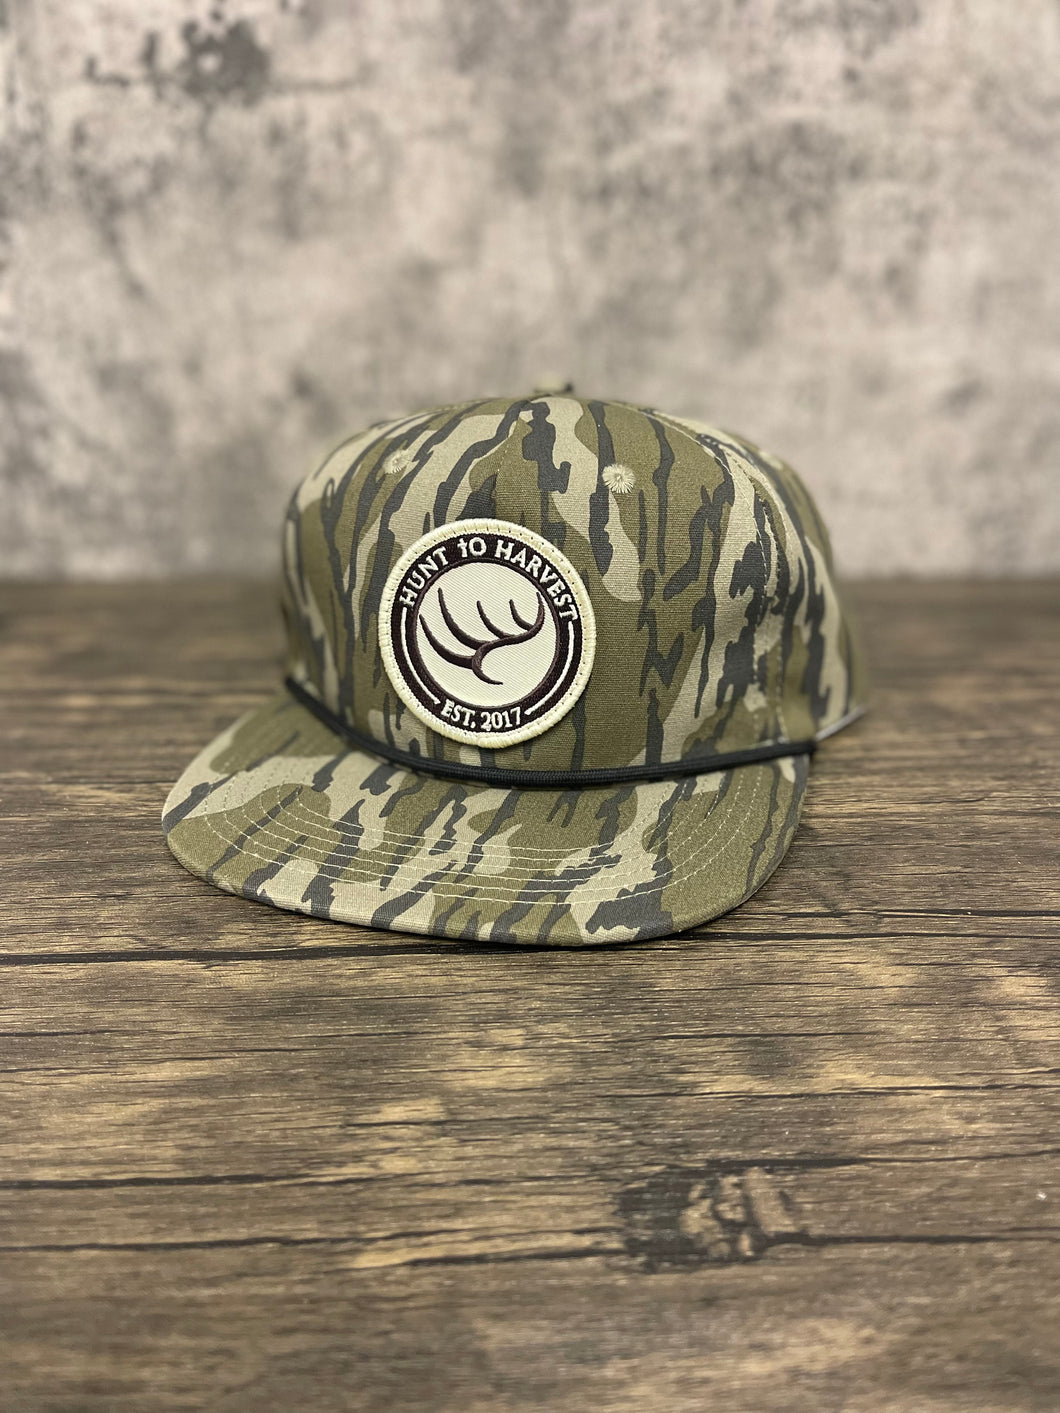 Hunt to Harvest Circle Woven Patch Hat - Bottomland Rope Hat